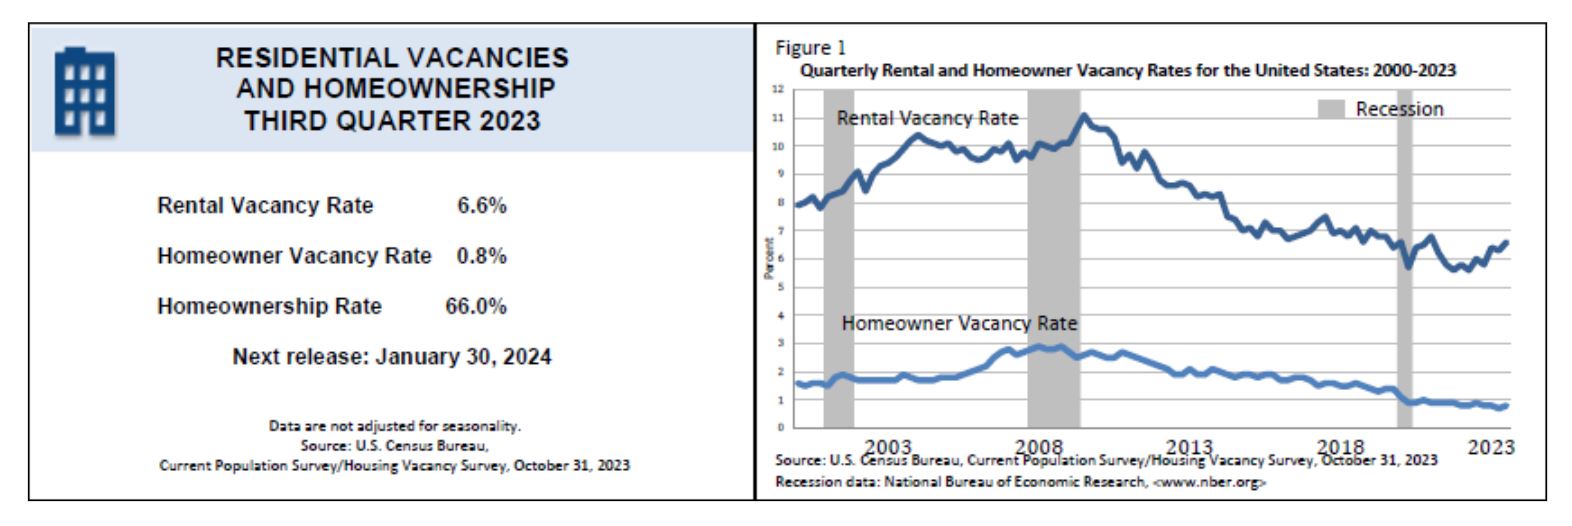 Quarterly Residential Vacancies and Homeownership